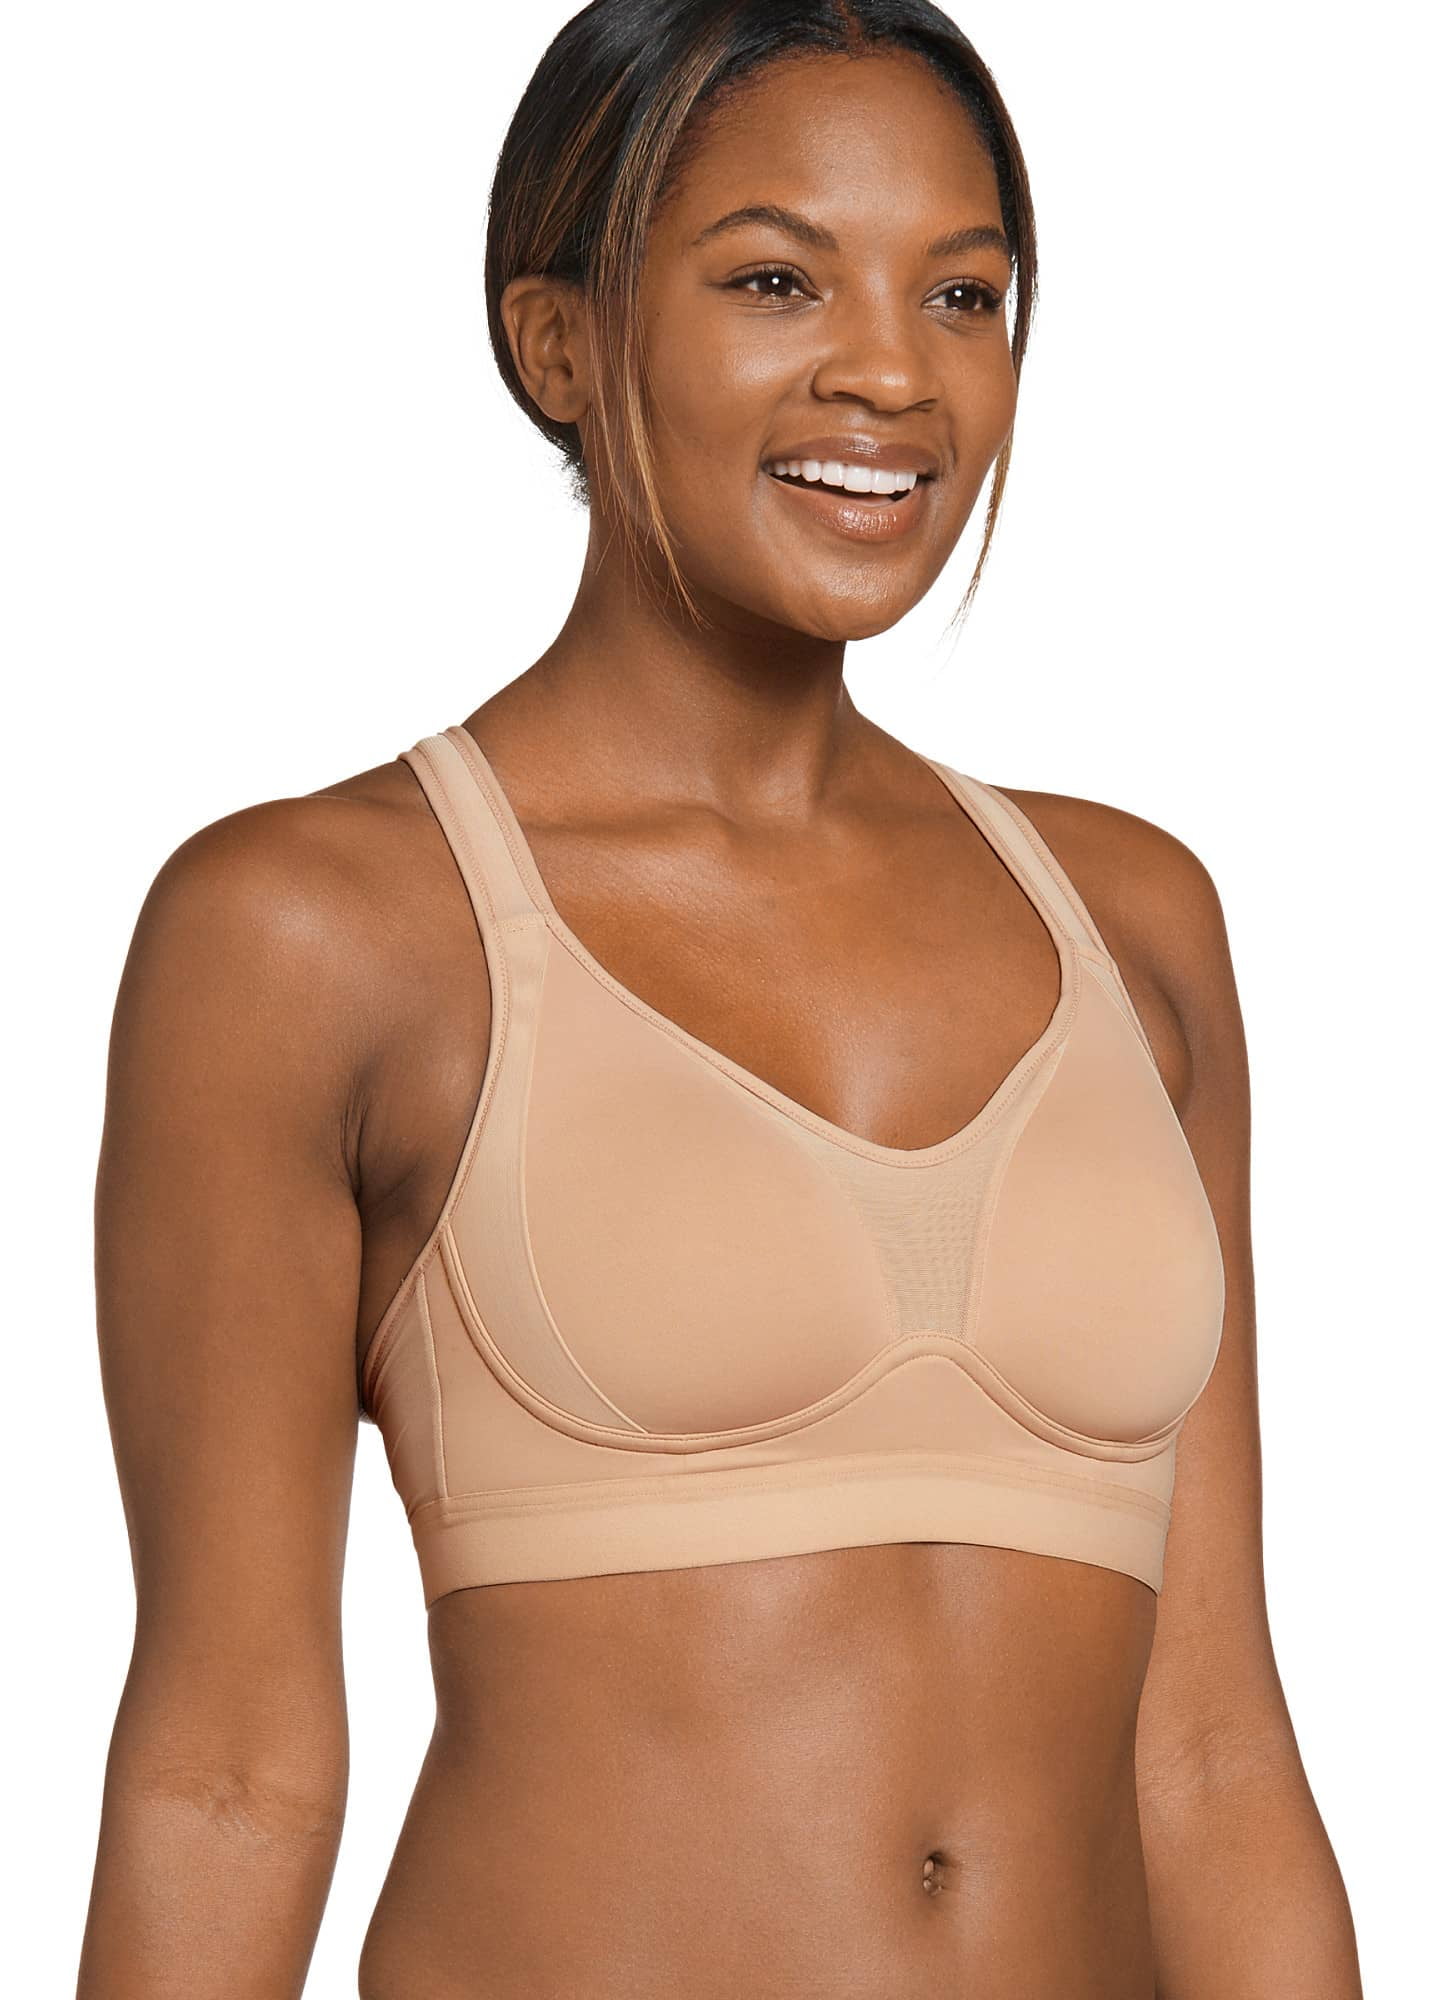 Stay comfortable and supported with Jockey's Molded Cup Sports Bra